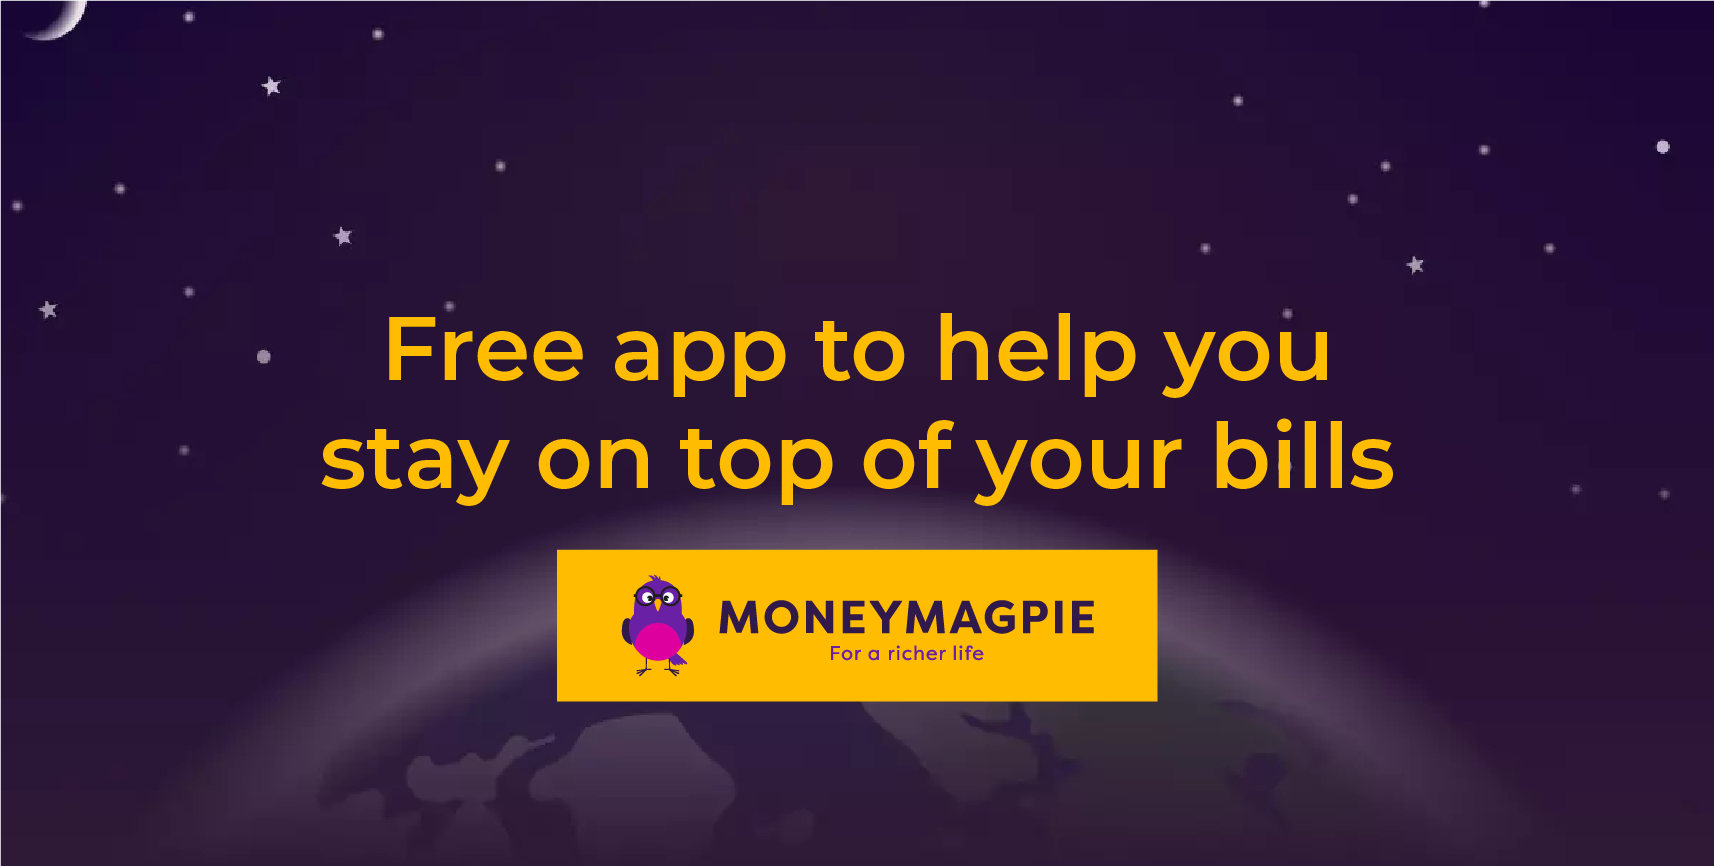 Free app to help you stay on top of your bills